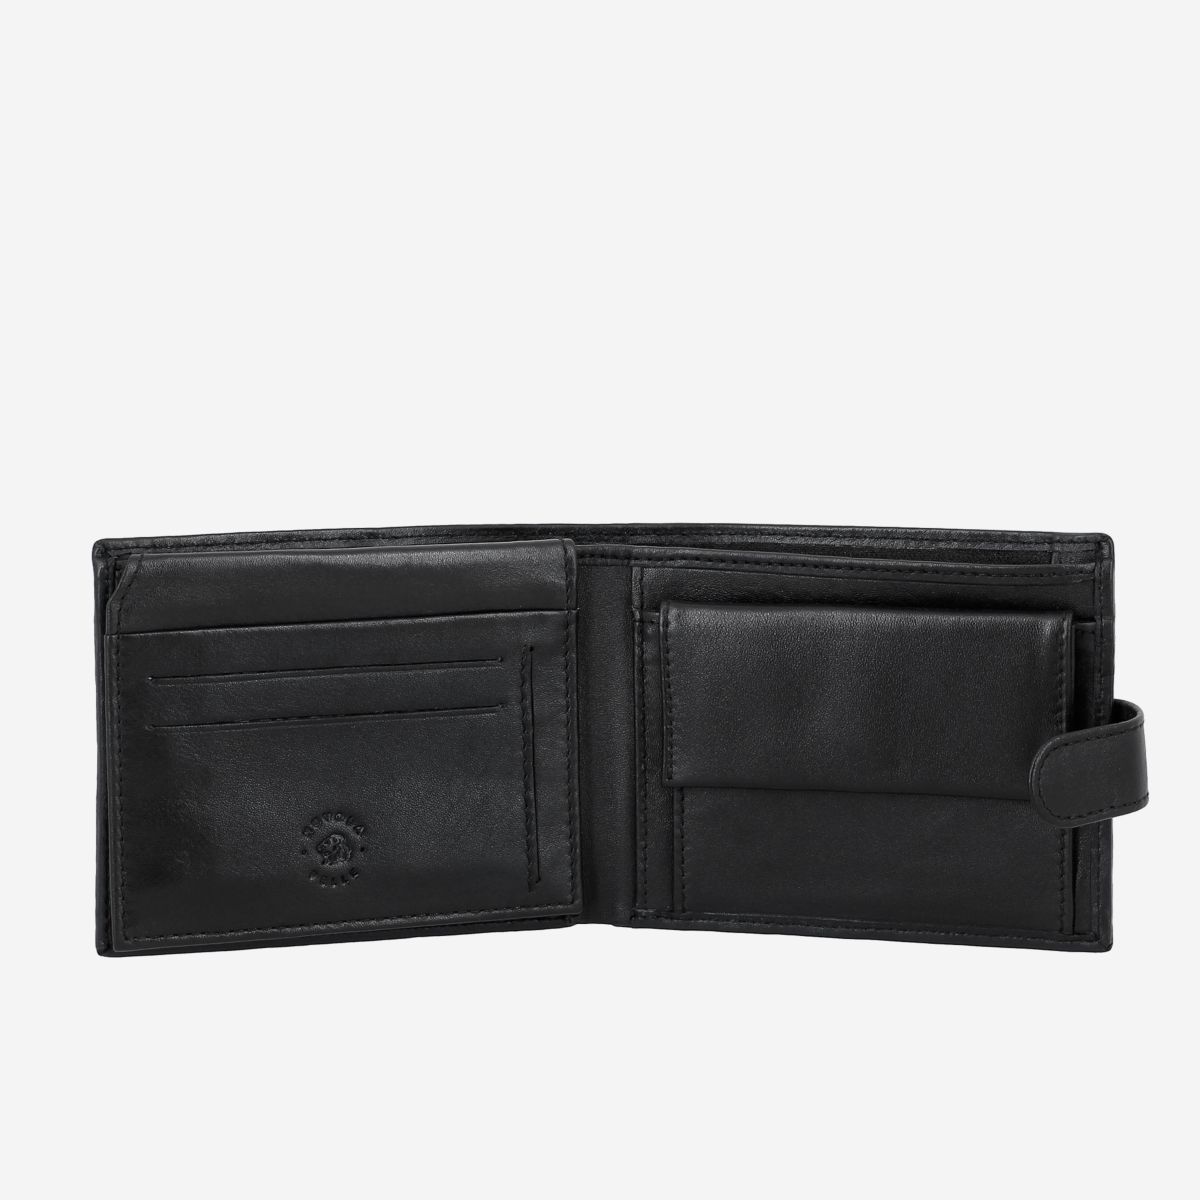 Nuvola Pelle Leather Men's Wallet with External Button Closure Internal Zip and Coin Purse